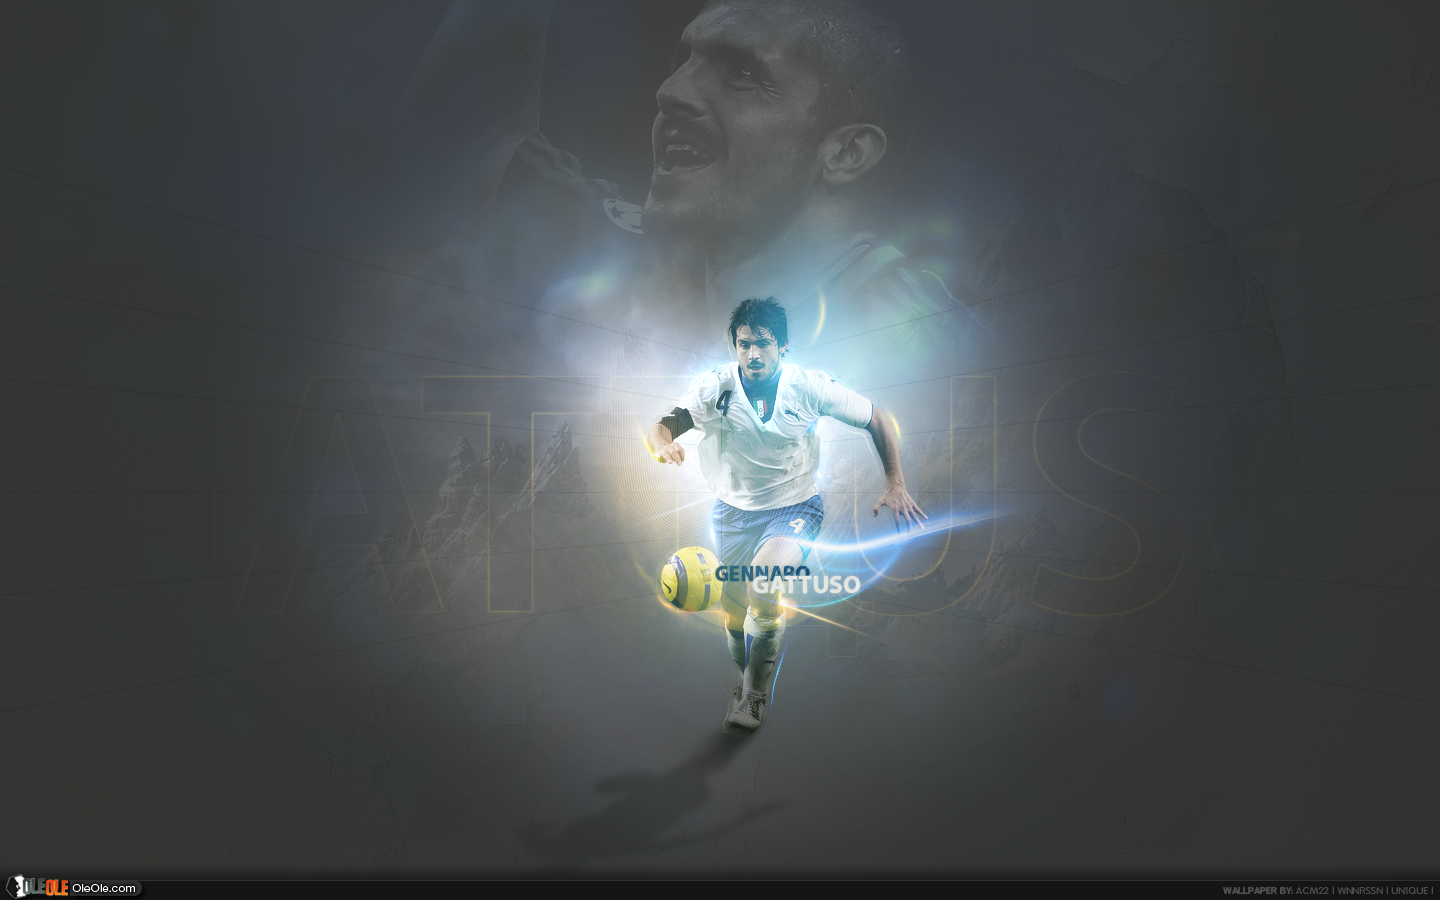 Gennaro Gattuso Wallpaper. Gennaro gattuso, Wallpaper, Most visited